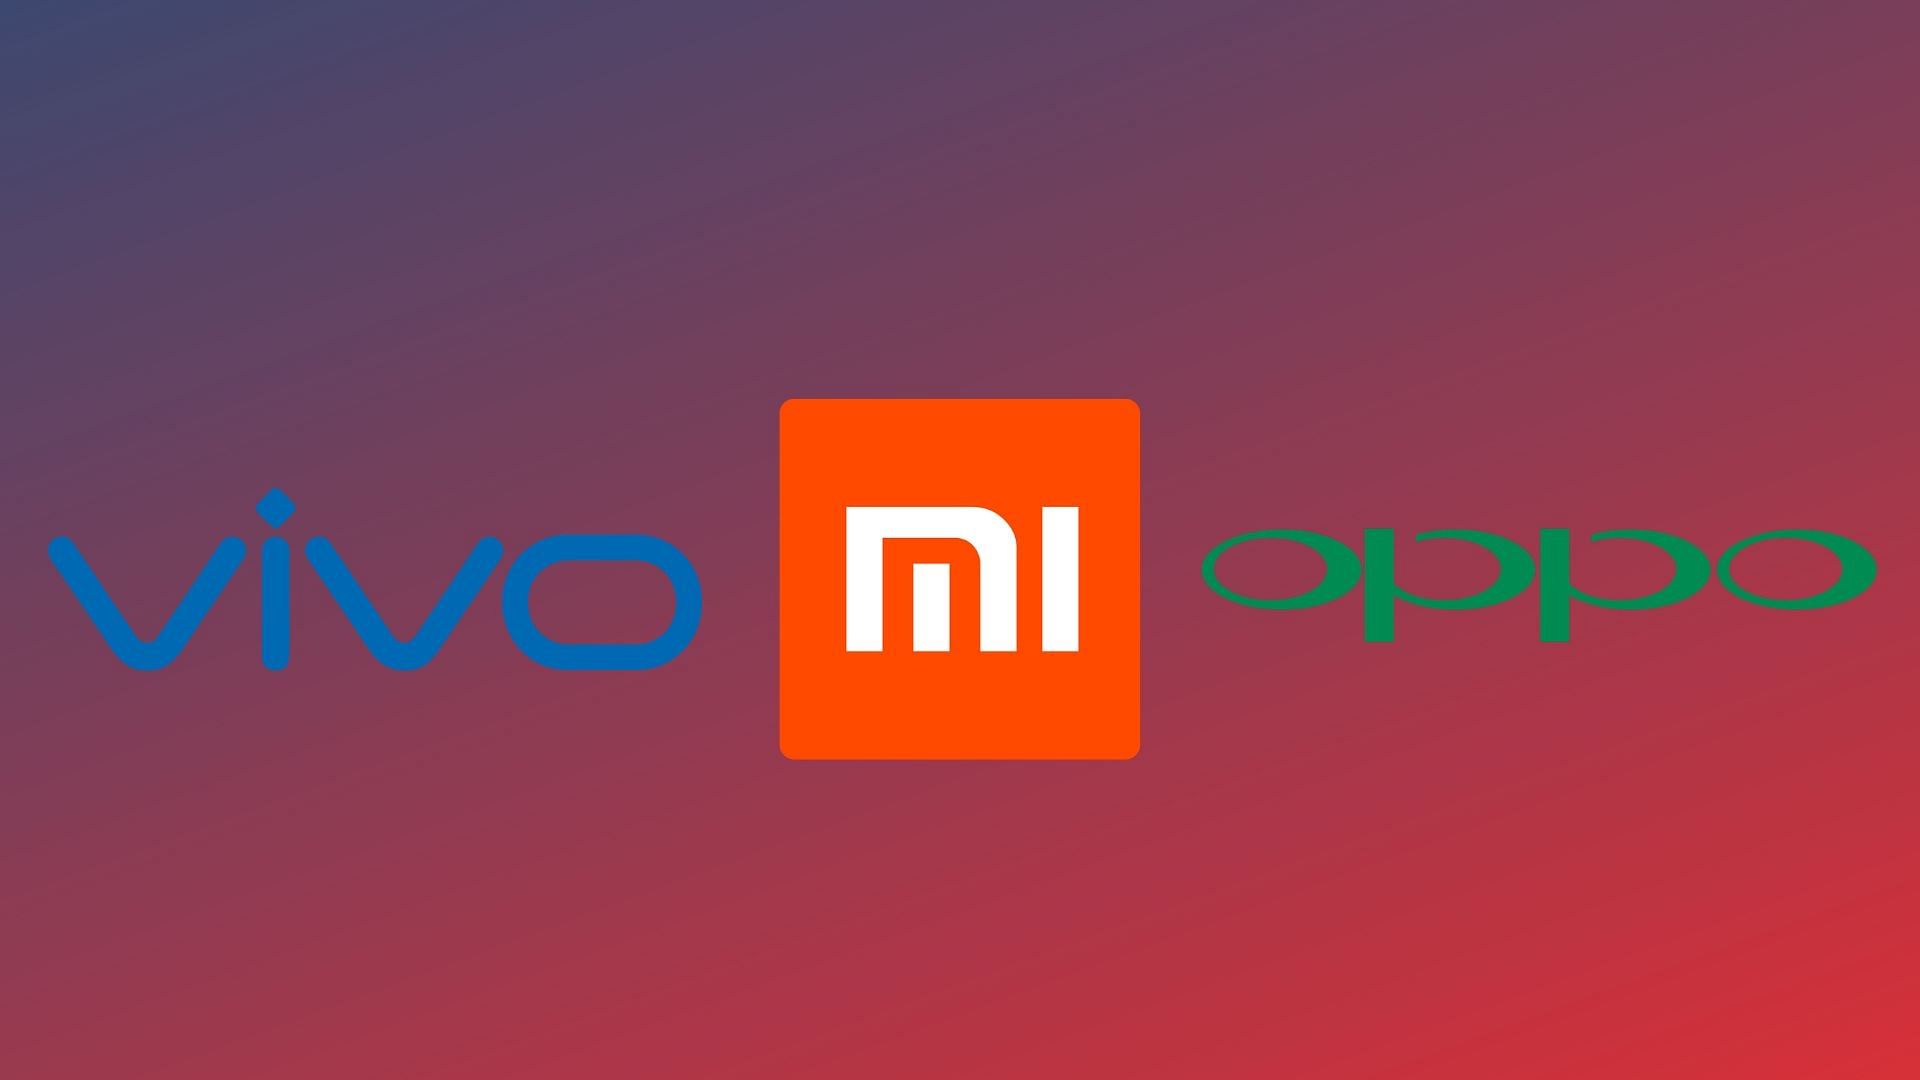 Vivo users will be able to transfer files wirelessly to Xiaomi users very soon.